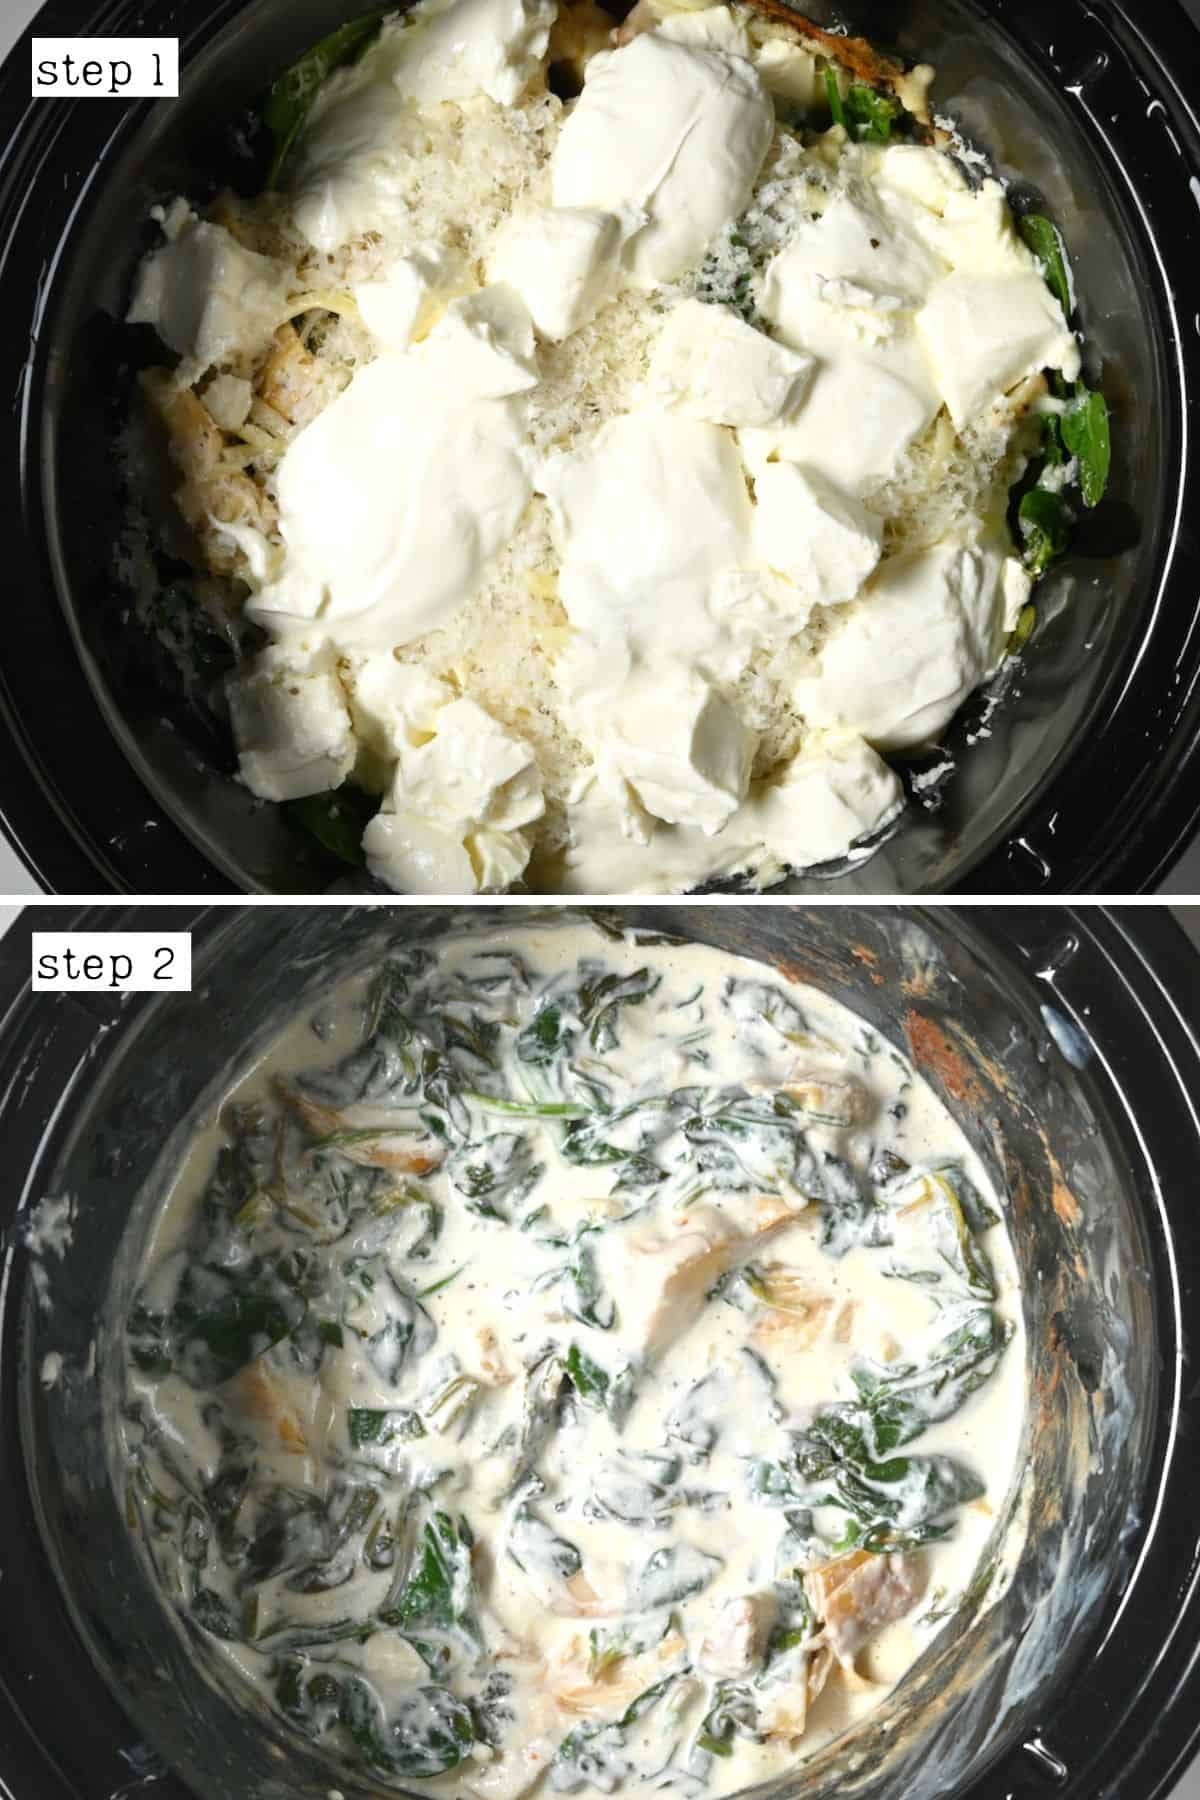 Mixing melted cheese with spinach and artichoke